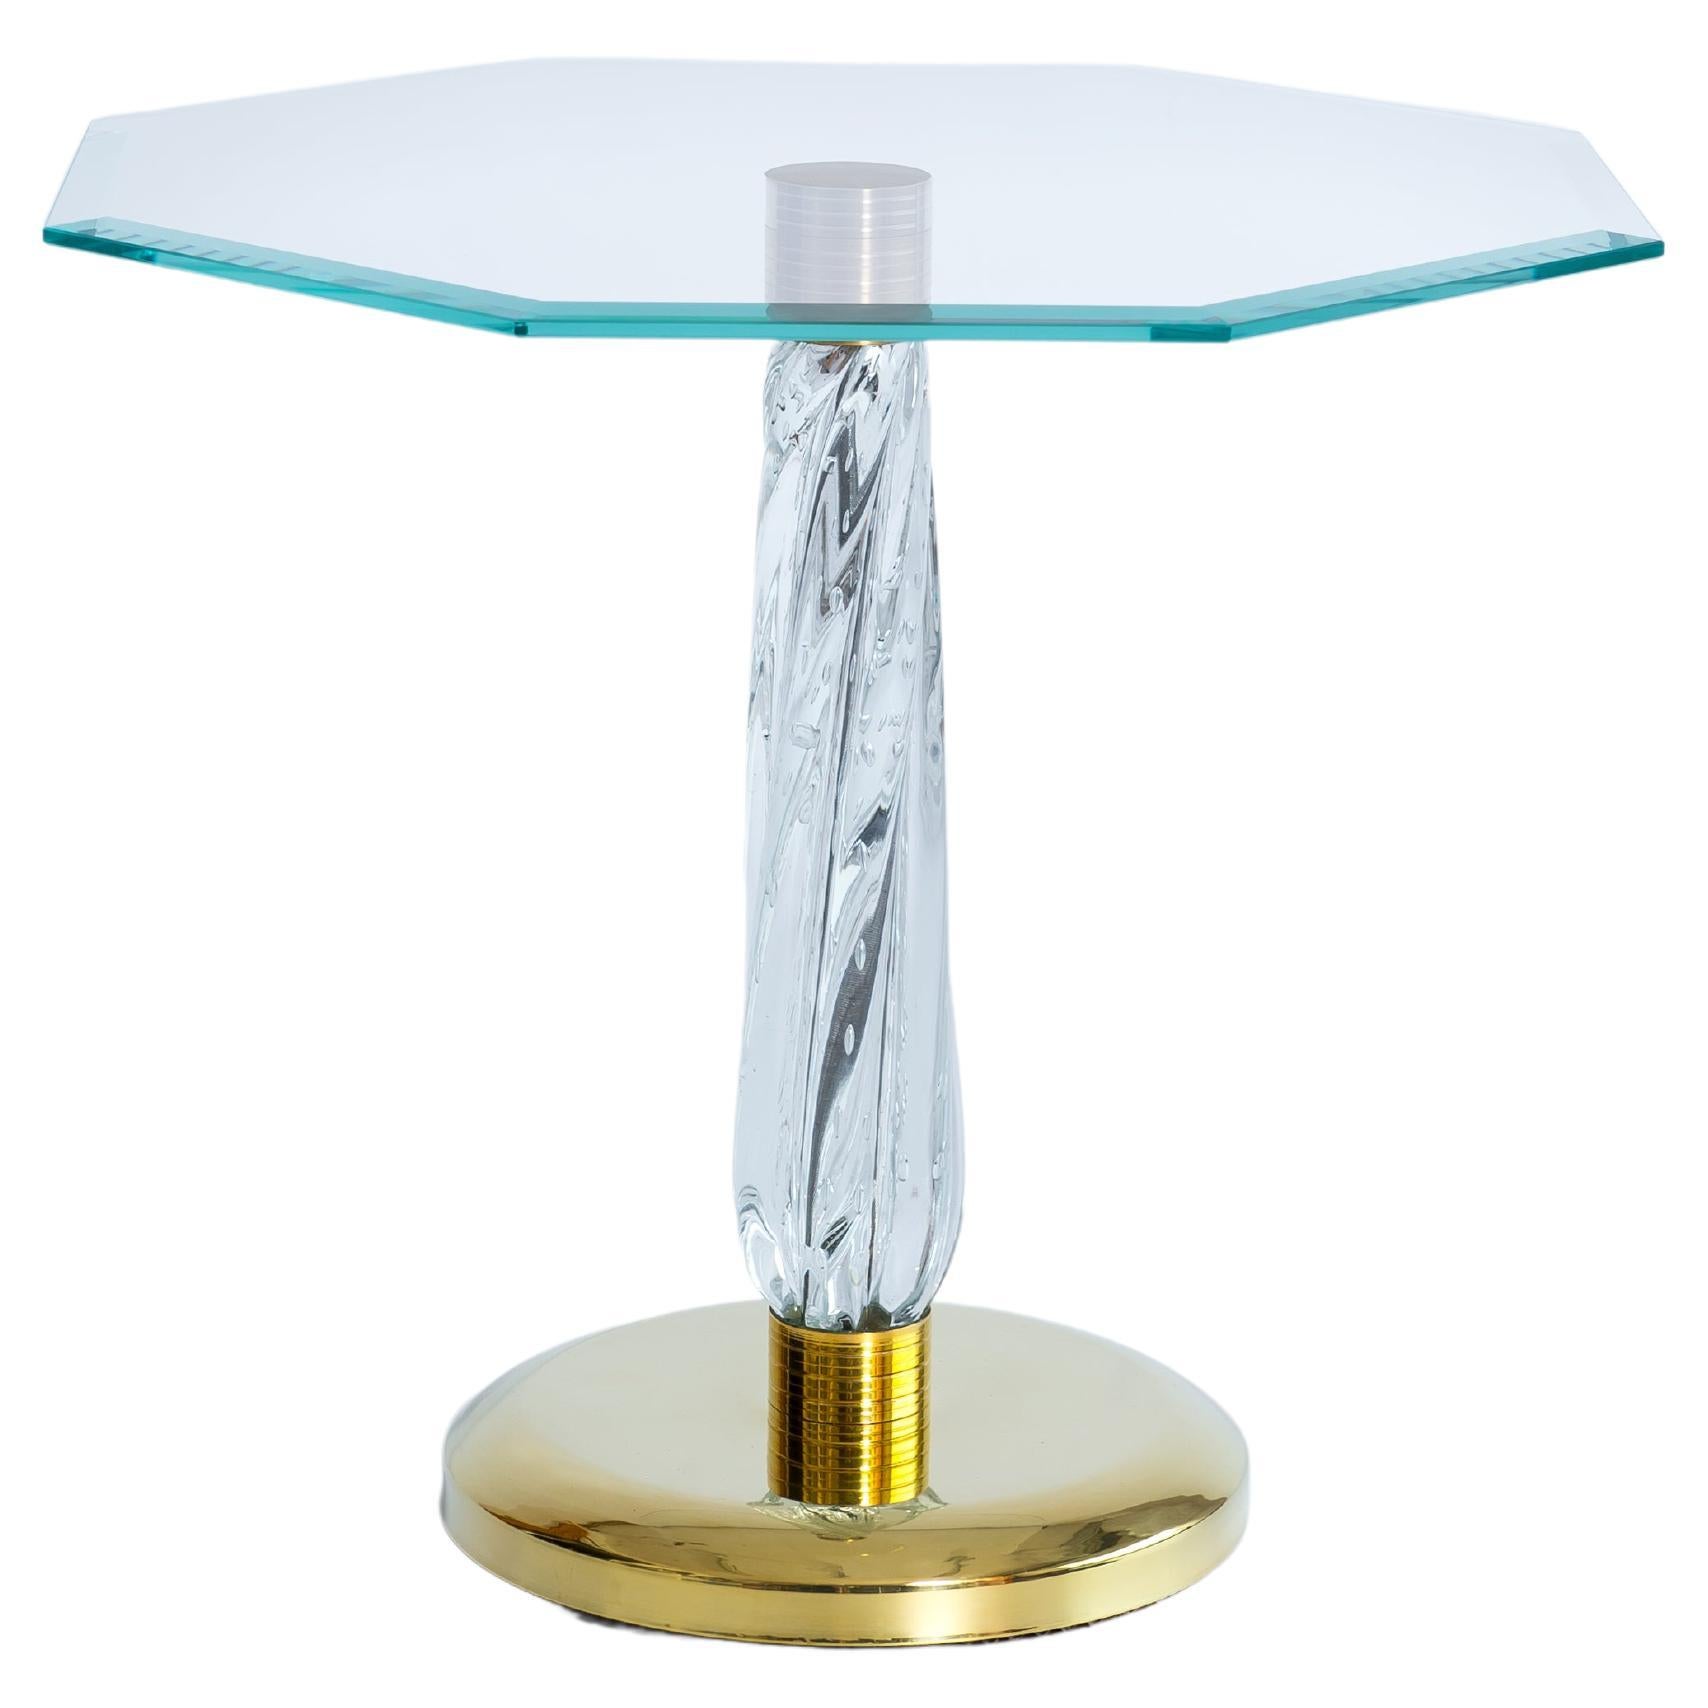 Gorgeous Venetian Cocktail Table in Murano Glass with Bronze Base, 21st Century For Sale